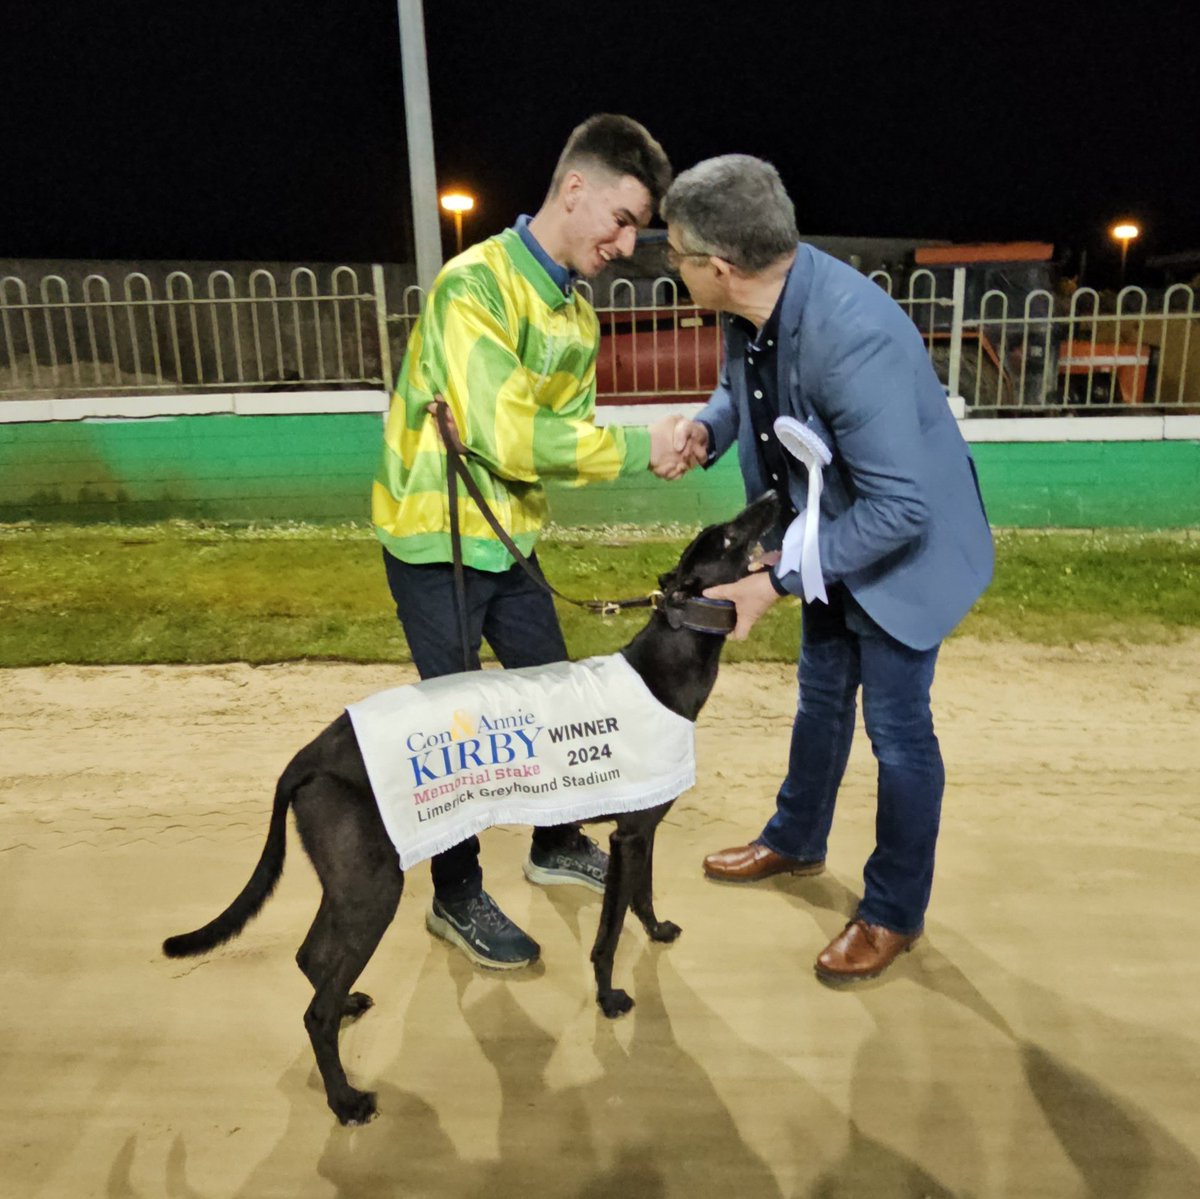 A truly wonderful sporting moment as Damian Matthews congratulates Daniel O'Rahilly and Knockeen Dazzler after their Con and Annie Kirby win. The Matthews were 2nd in the Final with Merits Inclusion but also bred Knockeen Dazzler so a special result for them too. #Kirby2024